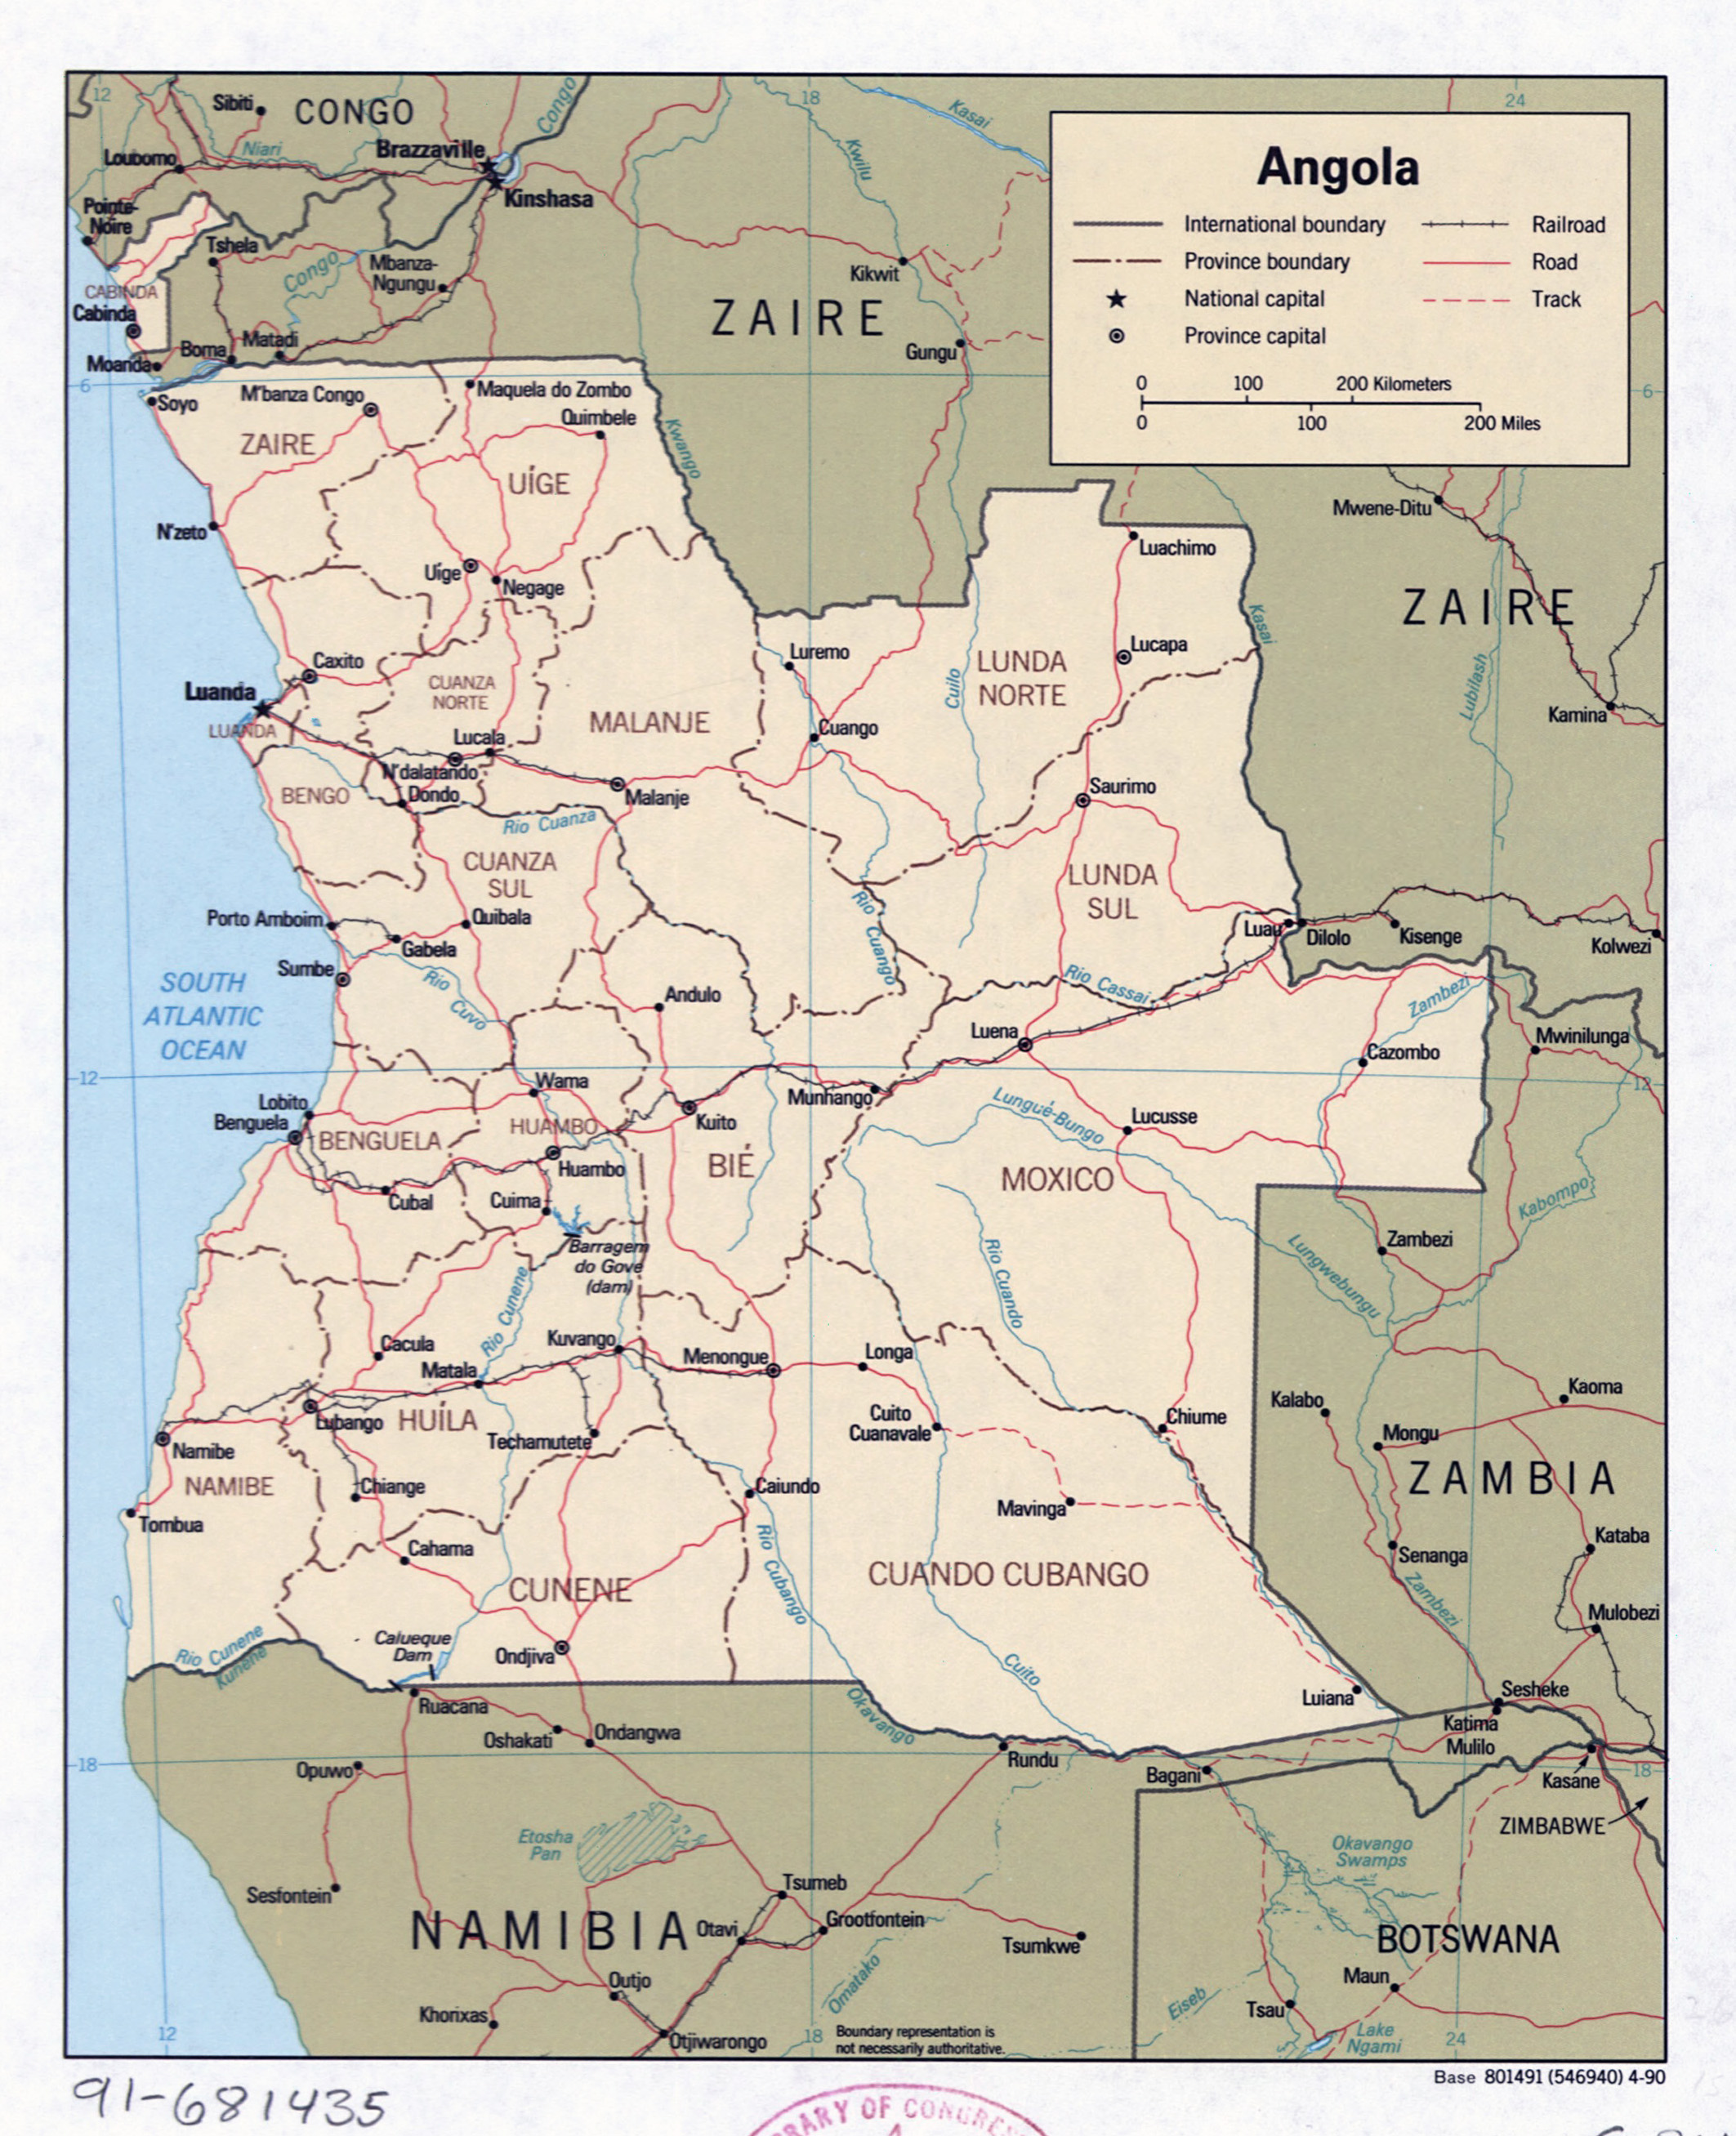 Large Detailed Political And Administrative Map Of Angola With Roads Railroads And Major Cities 1990 